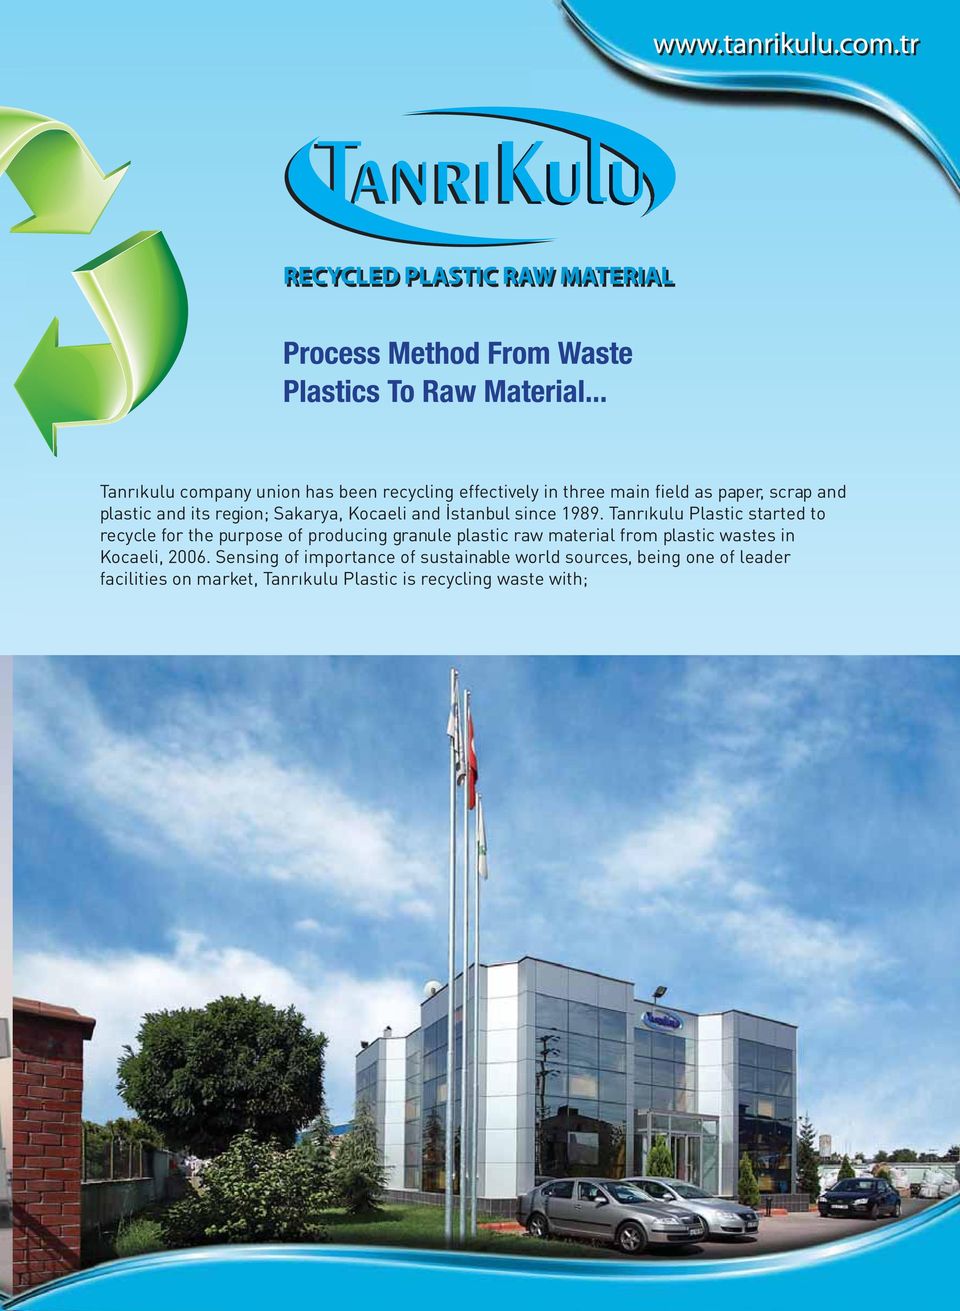 Tanrıkulu Plastic started to recycle for the purpose of producing granule plastic raw material from plastic